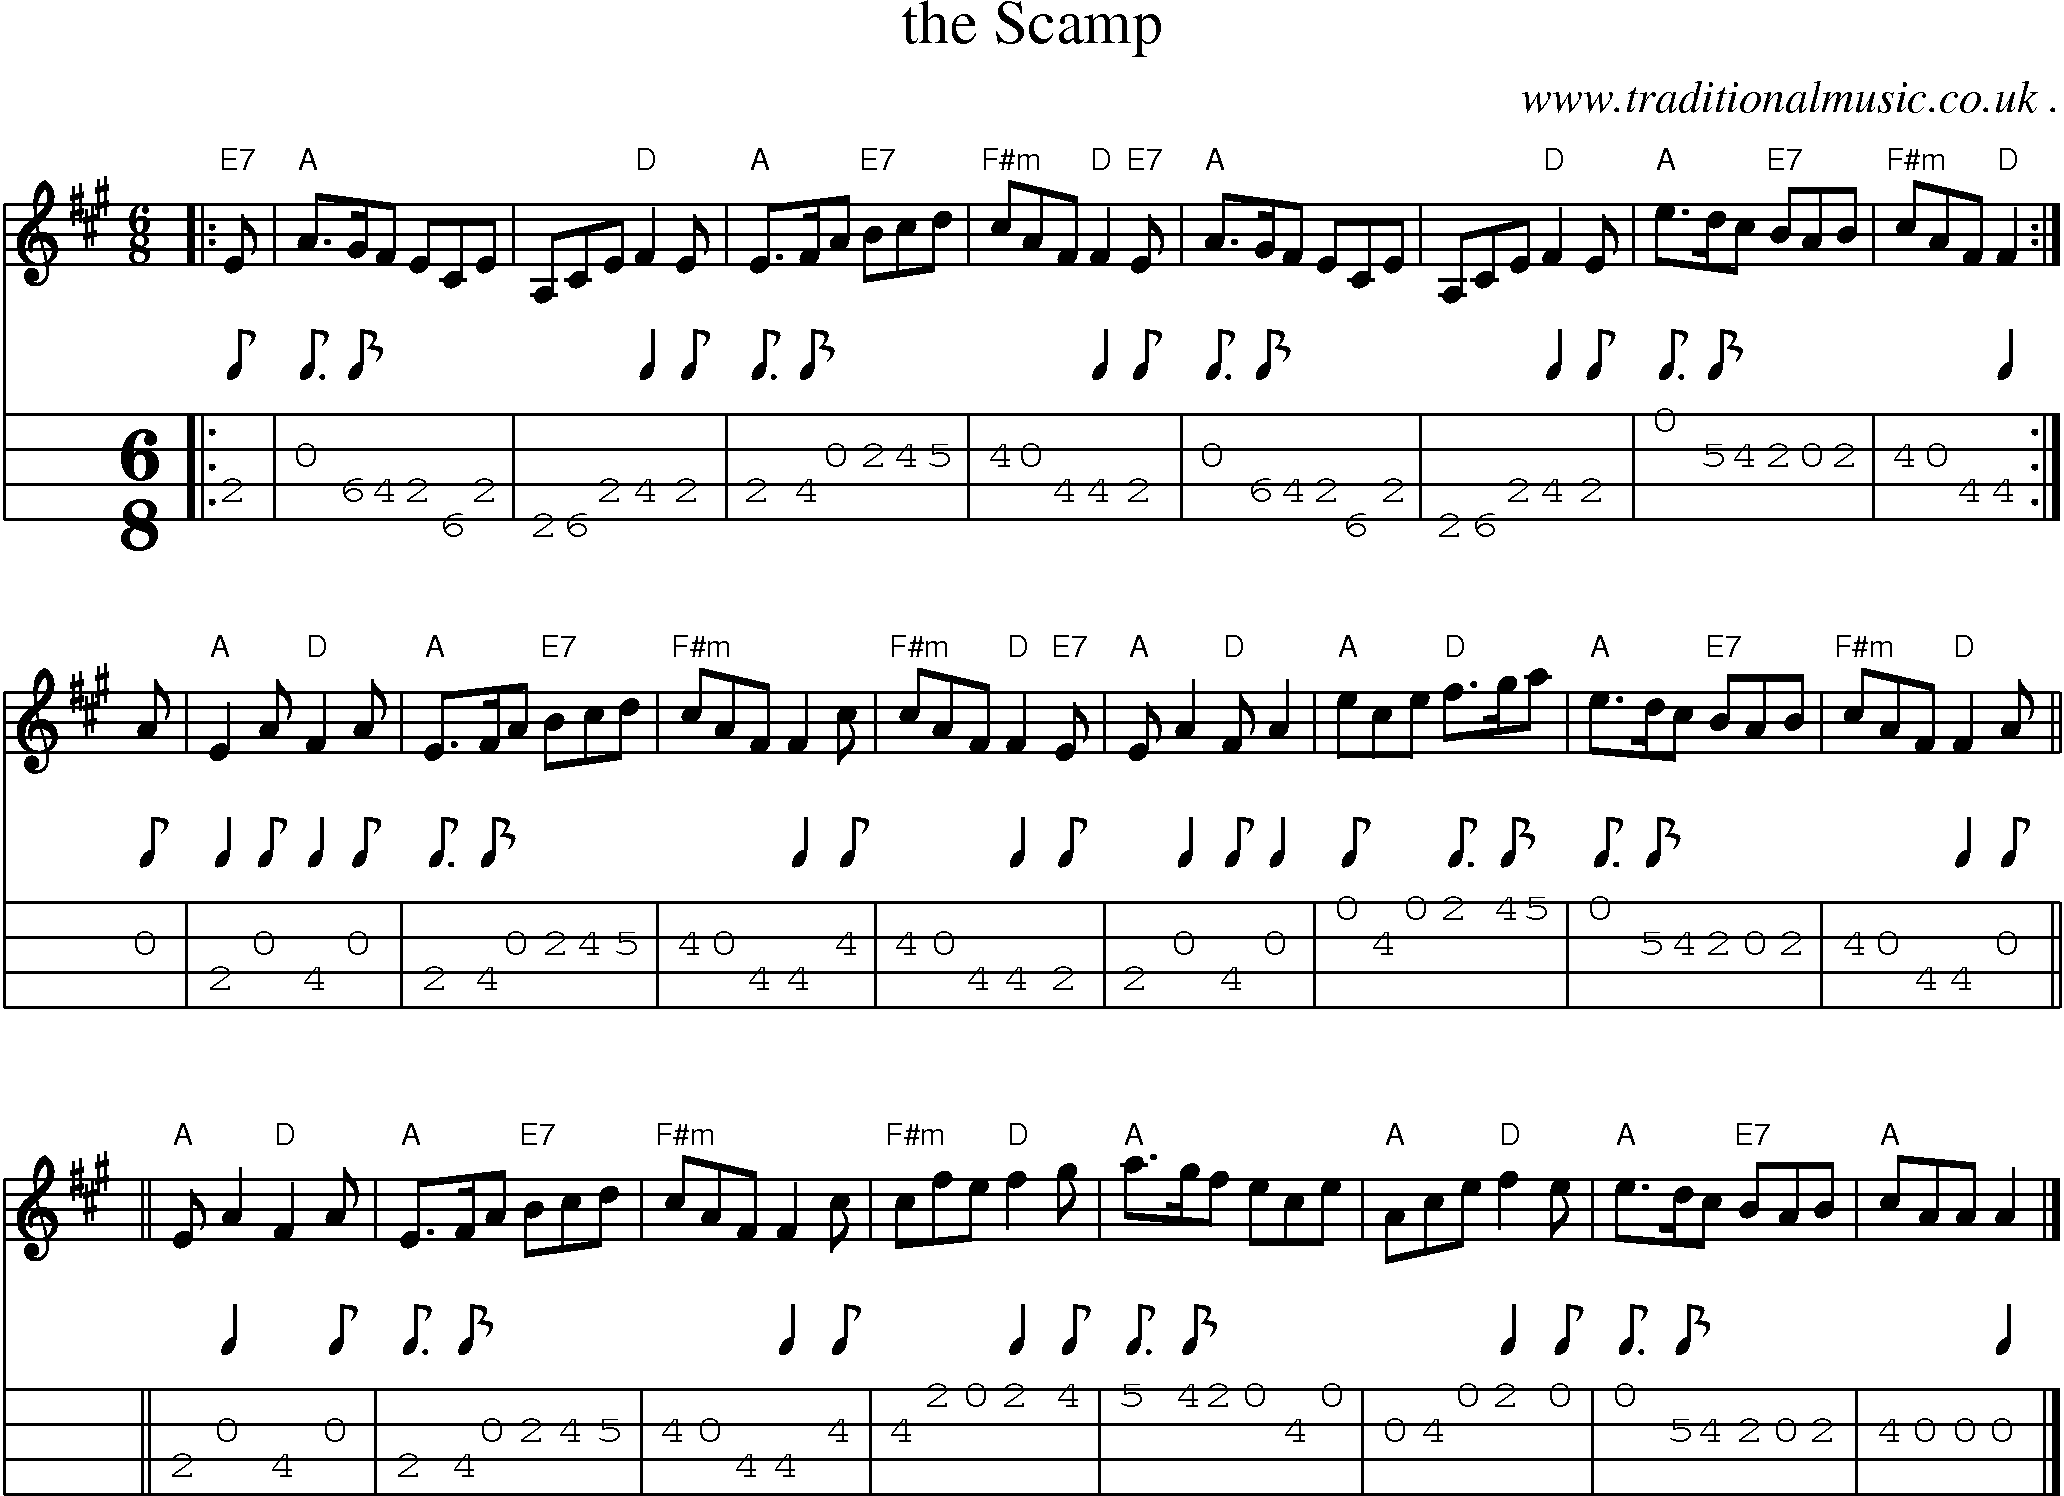 Sheet-music  score, Chords and Mandolin Tabs for The Scamp